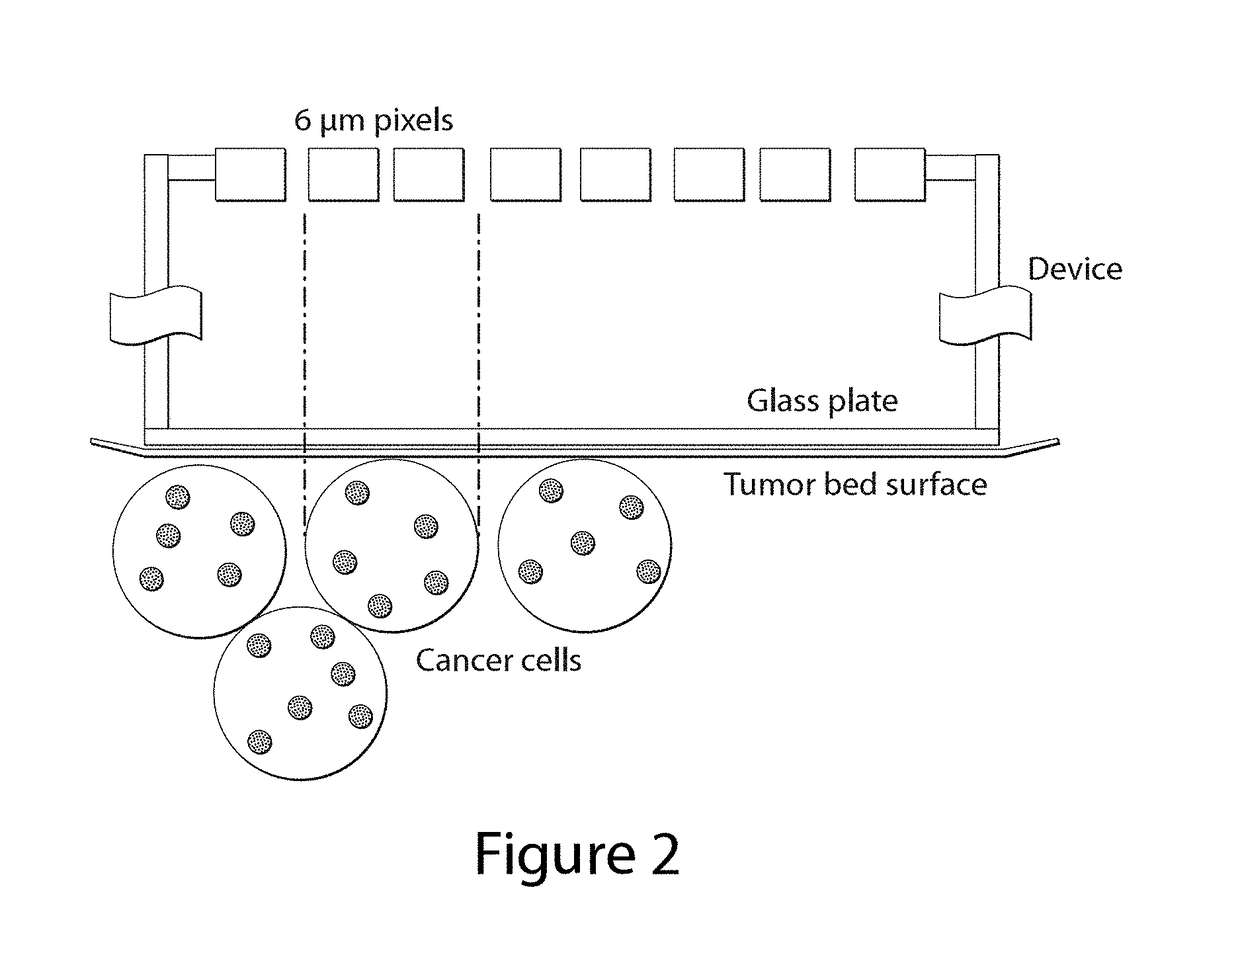 Imaging agent for detection of diseased cells